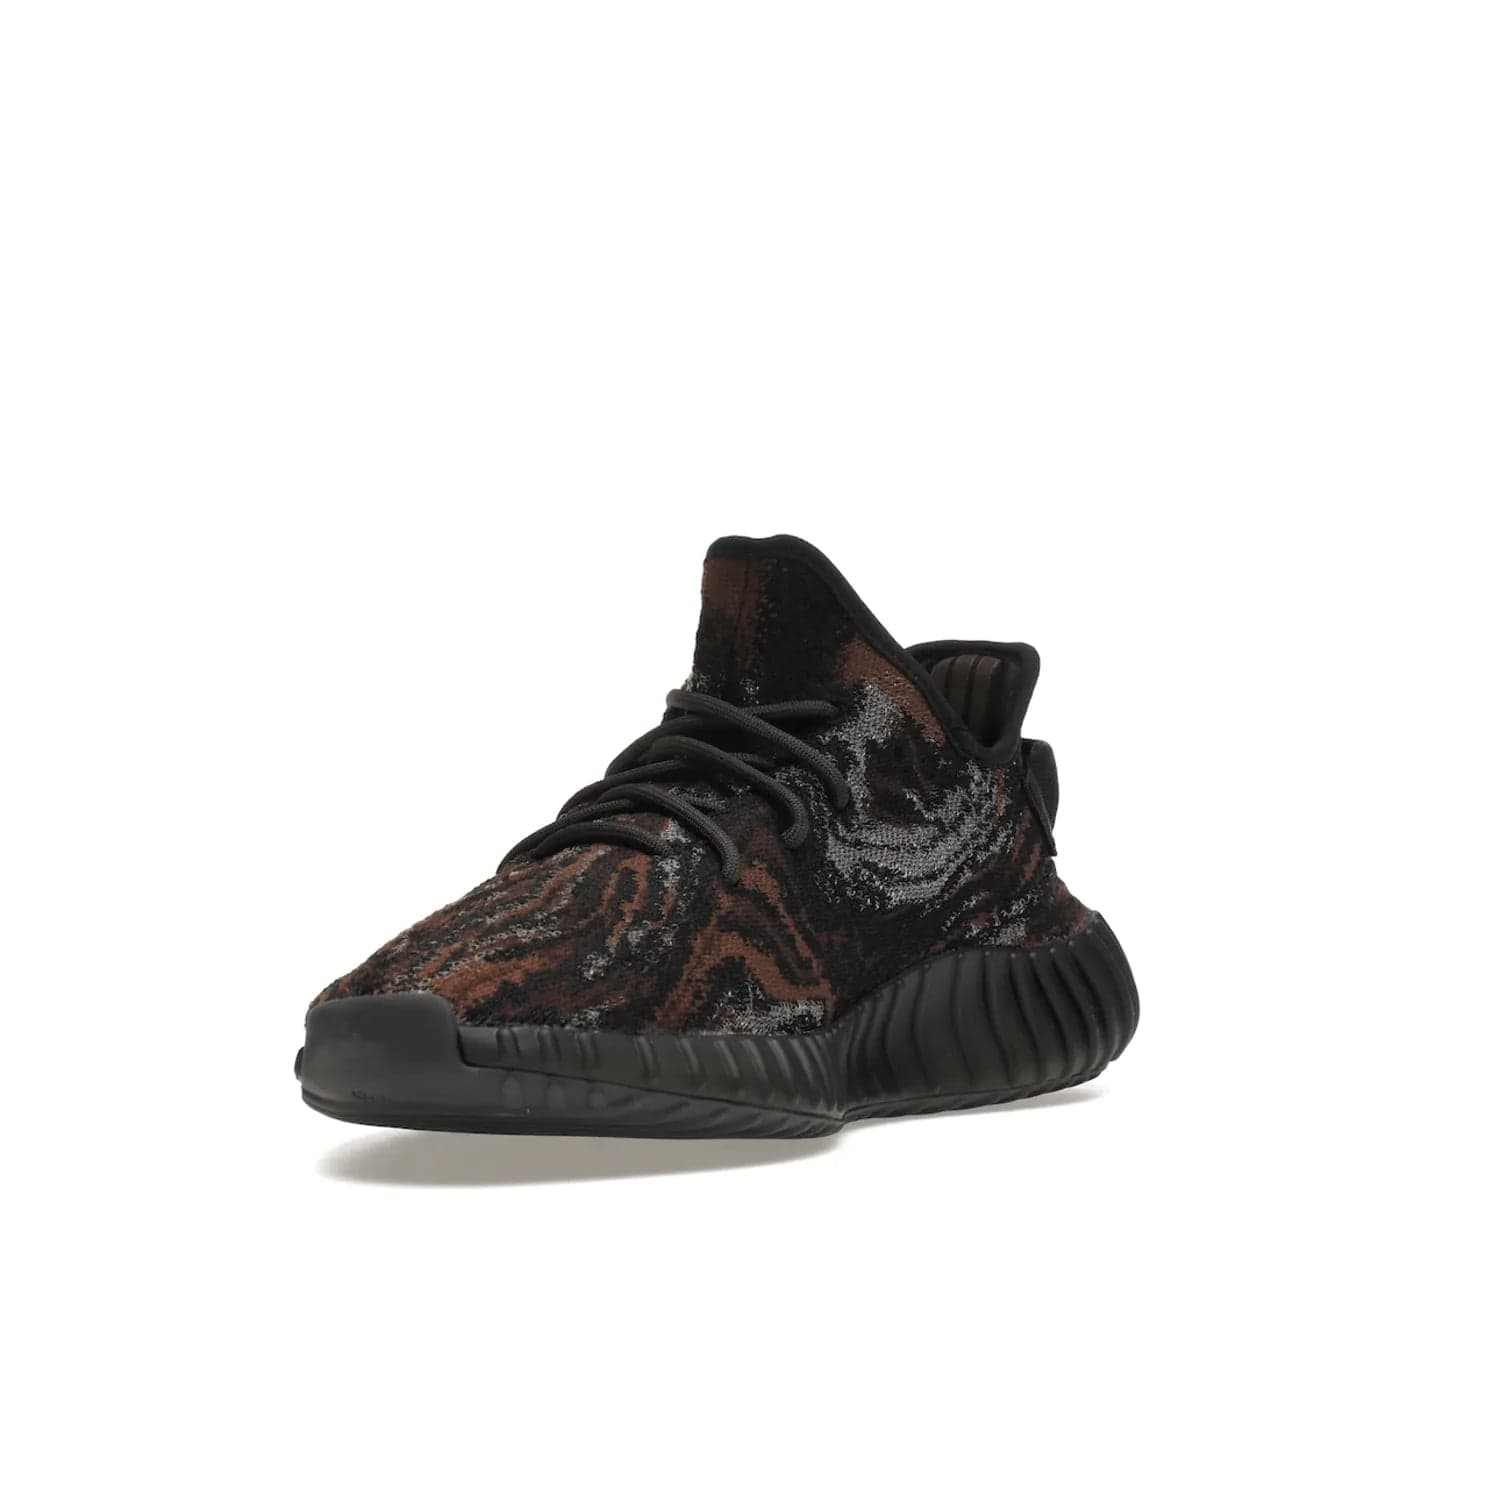 adidas Yeezy Boost 350 V2 MX Rock - Image 14 - Only at www.BallersClubKickz.com - The adidas Yeezy Boost 350 V2 MX Rock features a stylish marbled upper of black, grey, and brown tones. Shop the signature Boost sole, heel tab, and mesh side stripe now, available December of 2021.